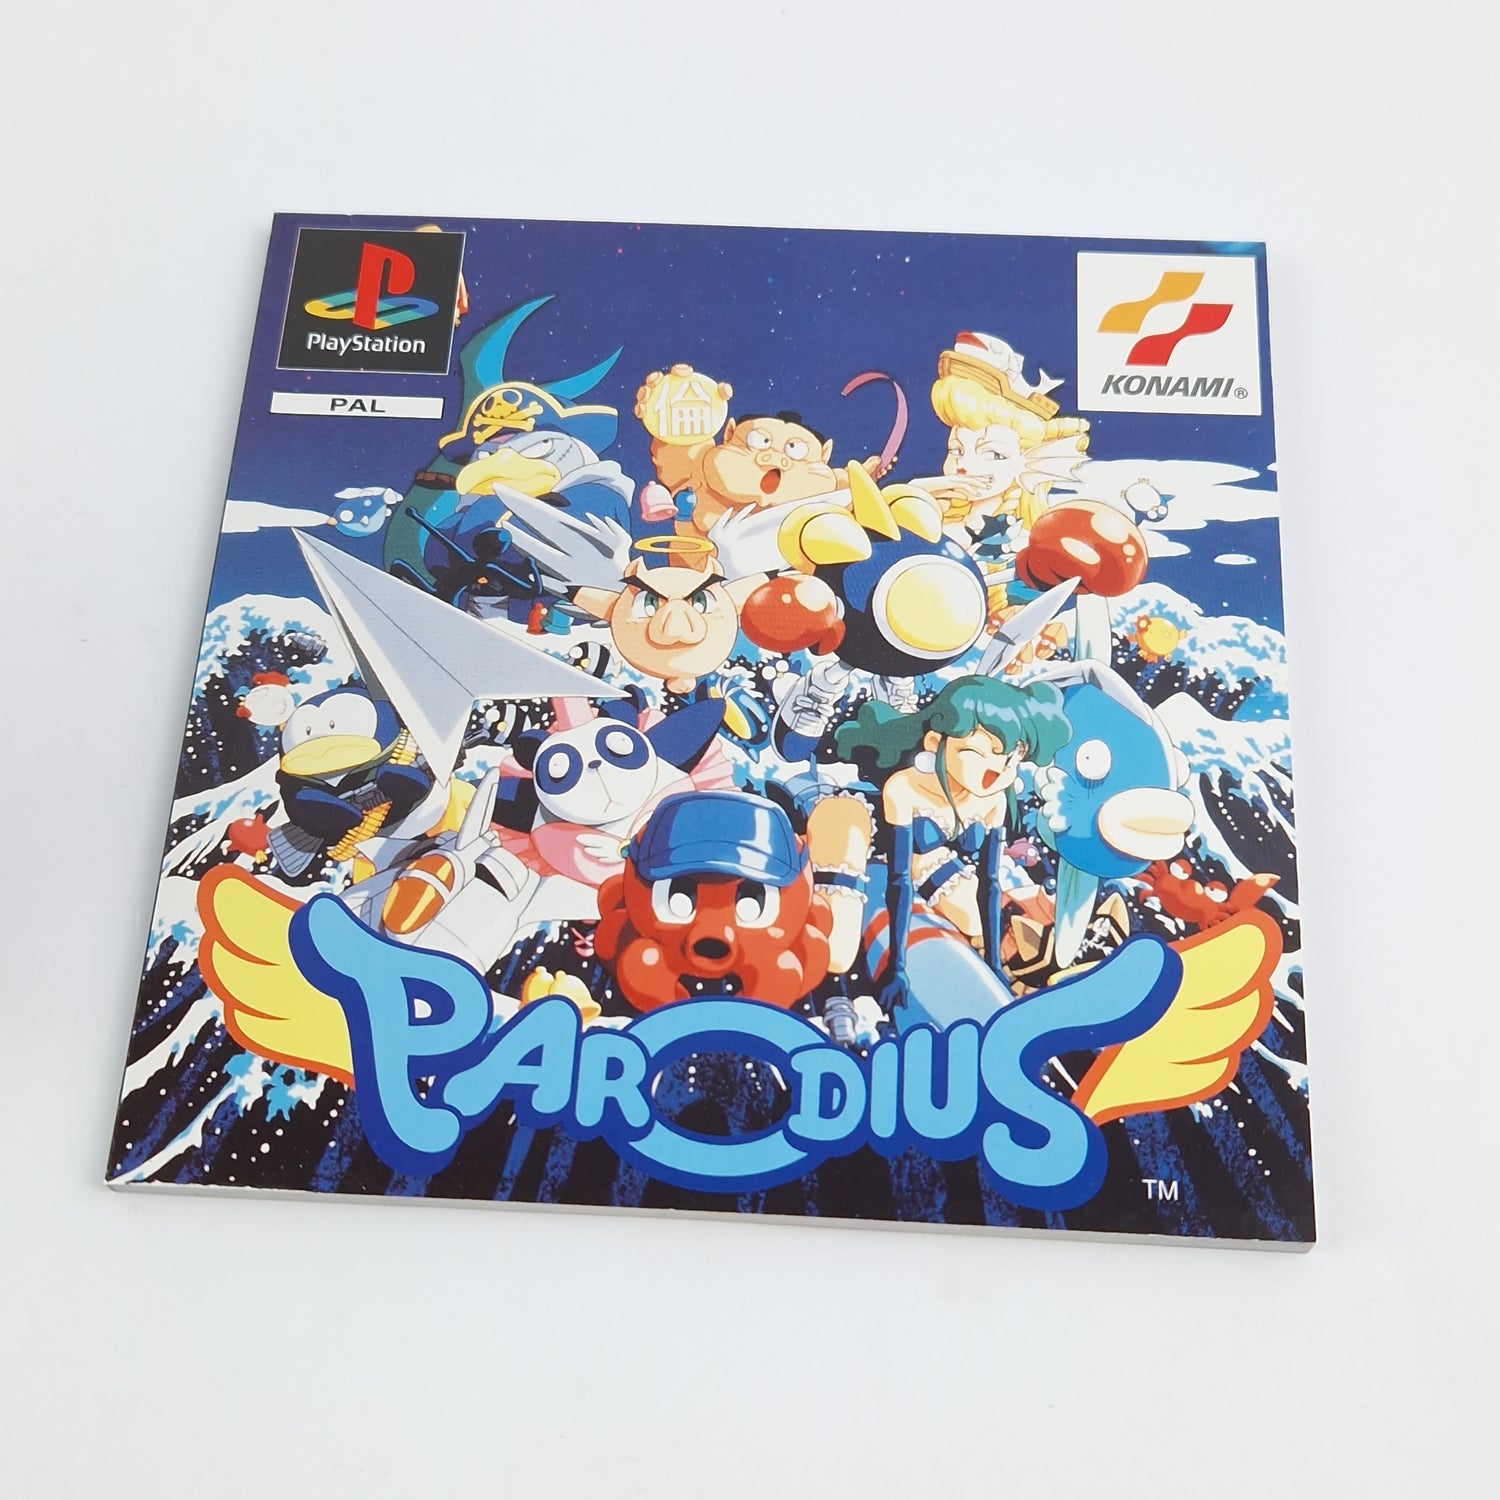 Playstation 1 Spiel : Parodius - CD Anleitung OVP | SONY PS1 PSX PAL